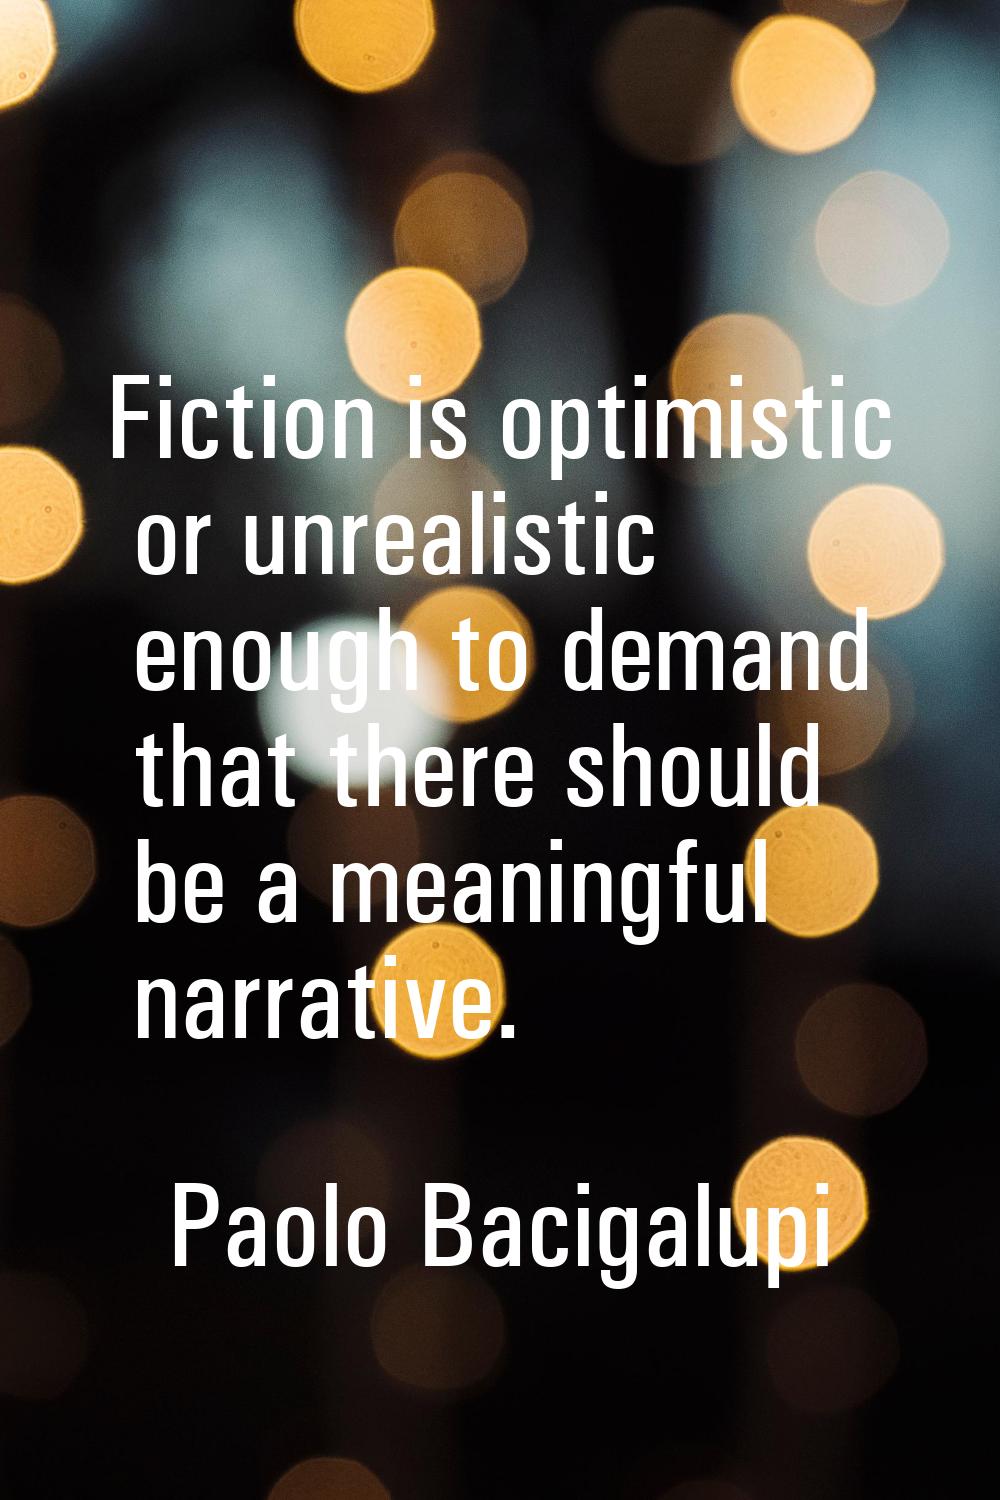 Fiction is optimistic or unrealistic enough to demand that there should be a meaningful narrative.